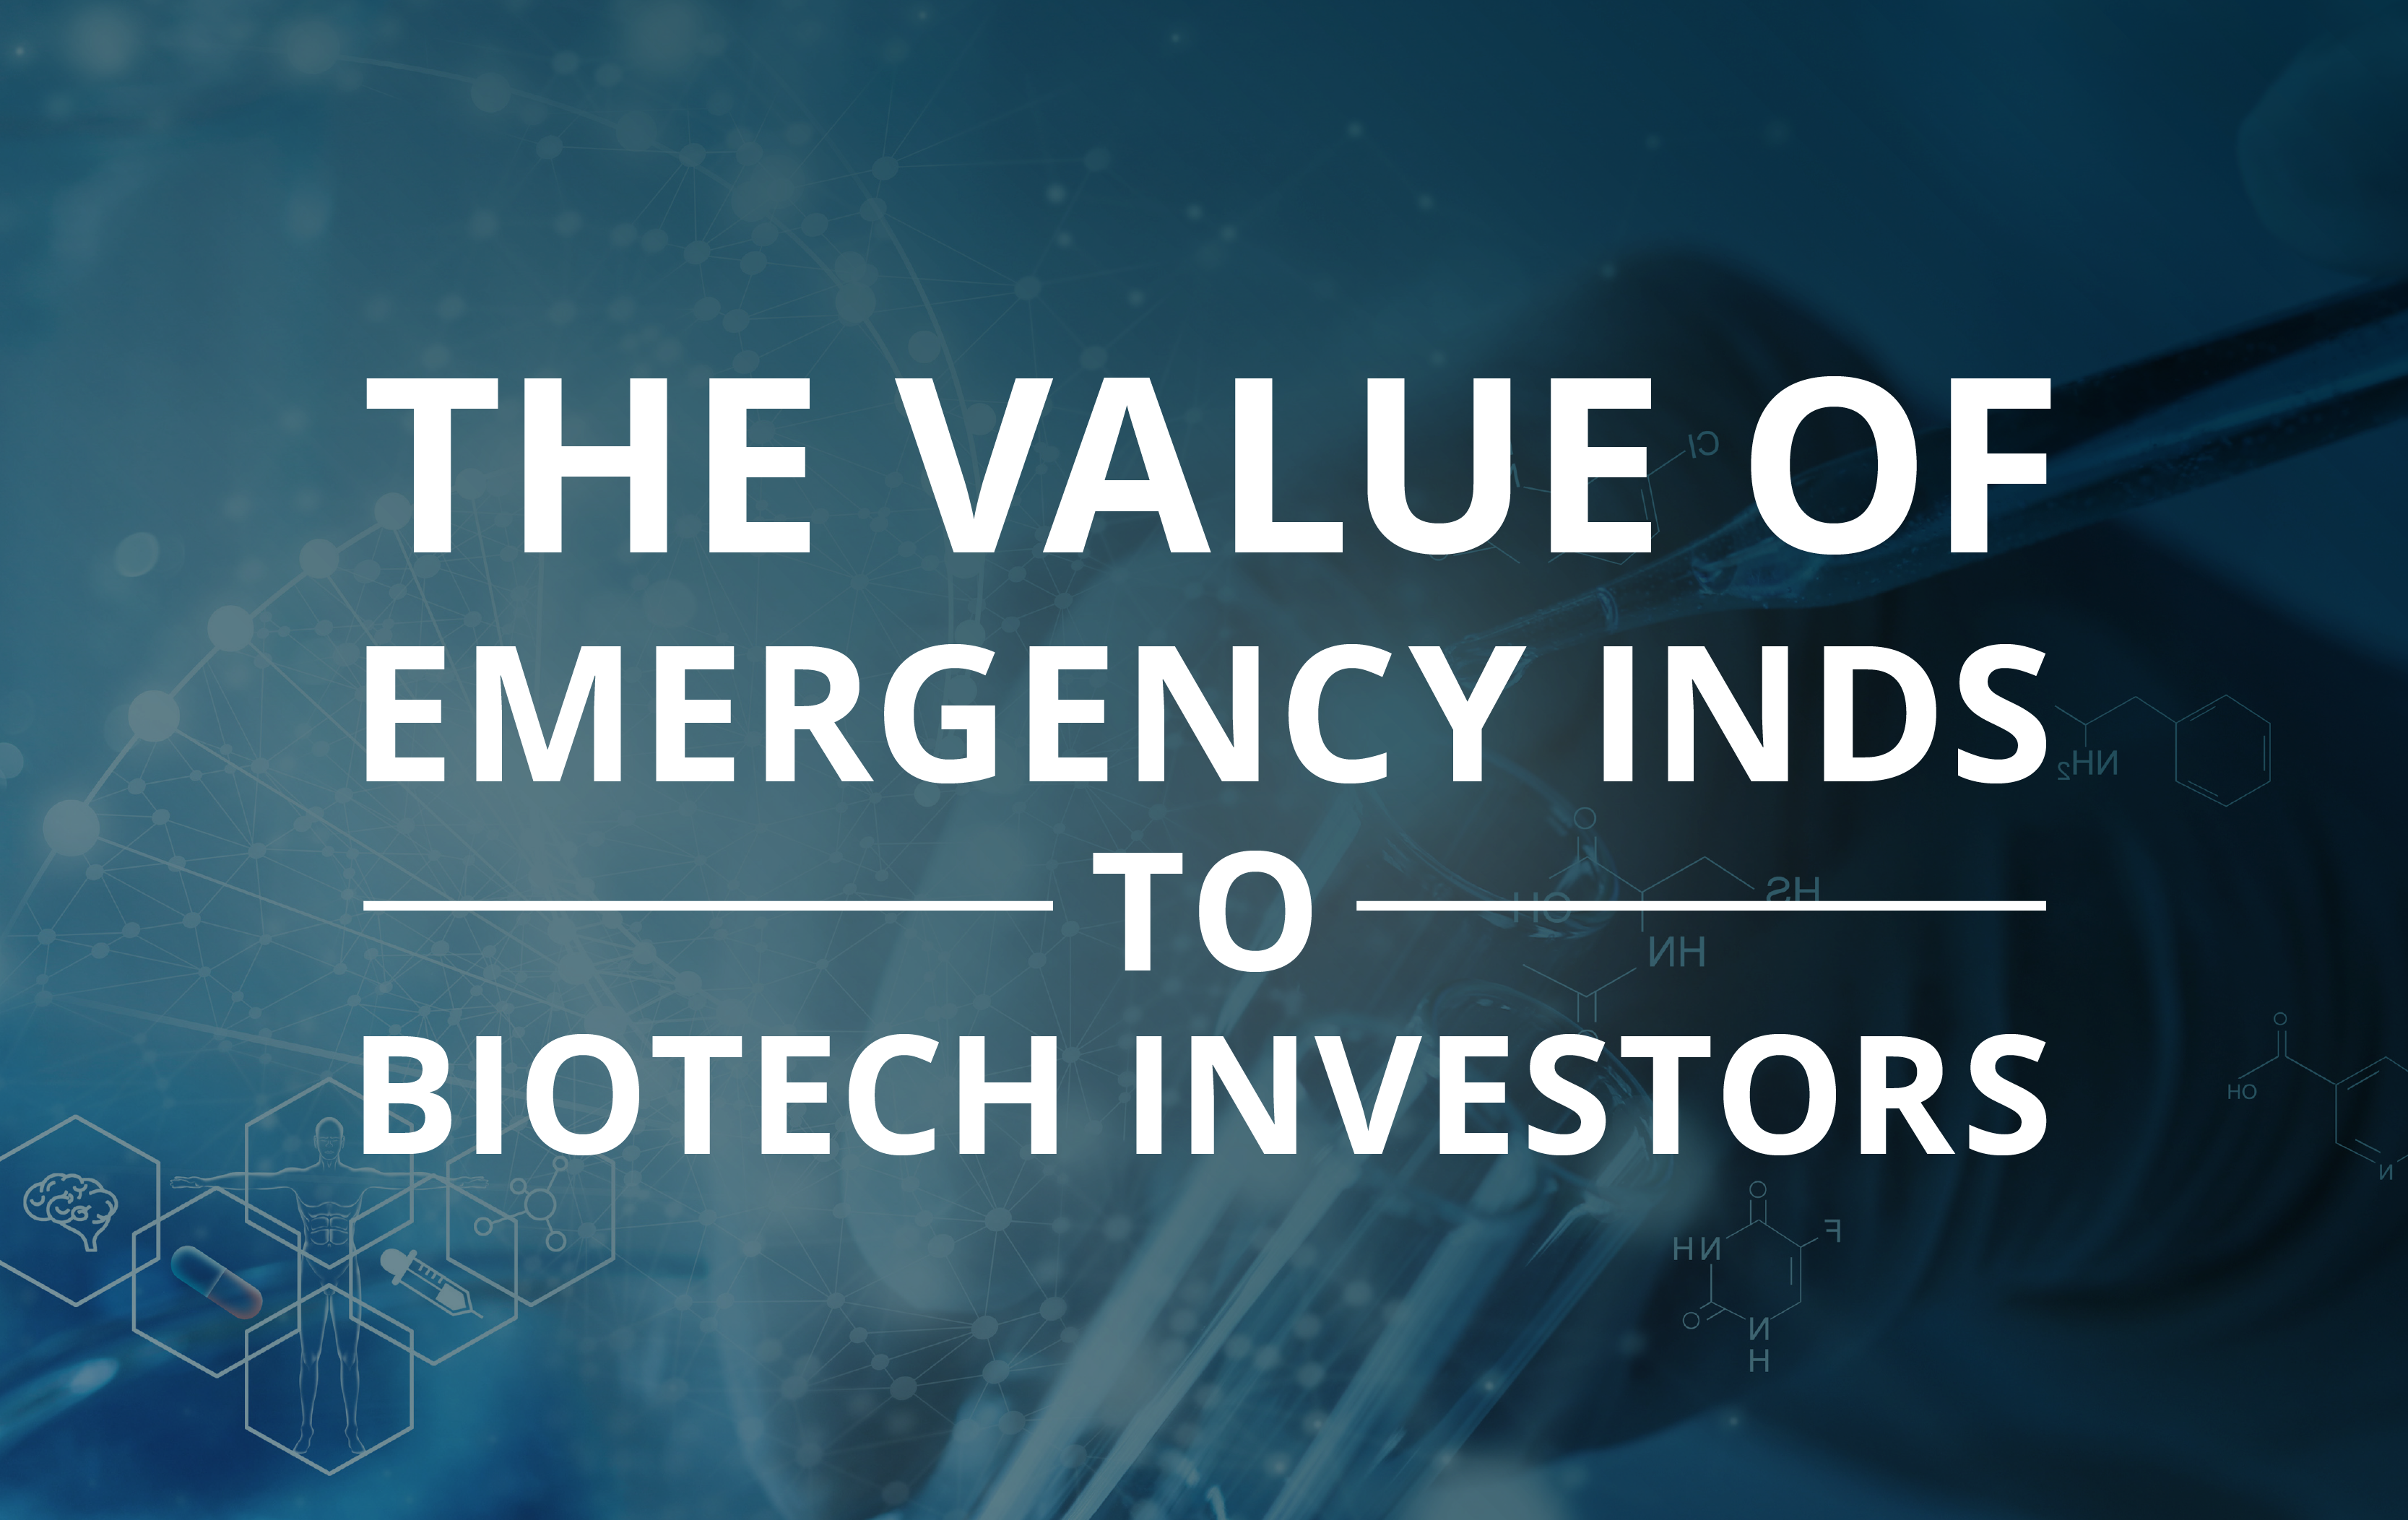 image for The Value Of Emergency INDs To Biotech Investors